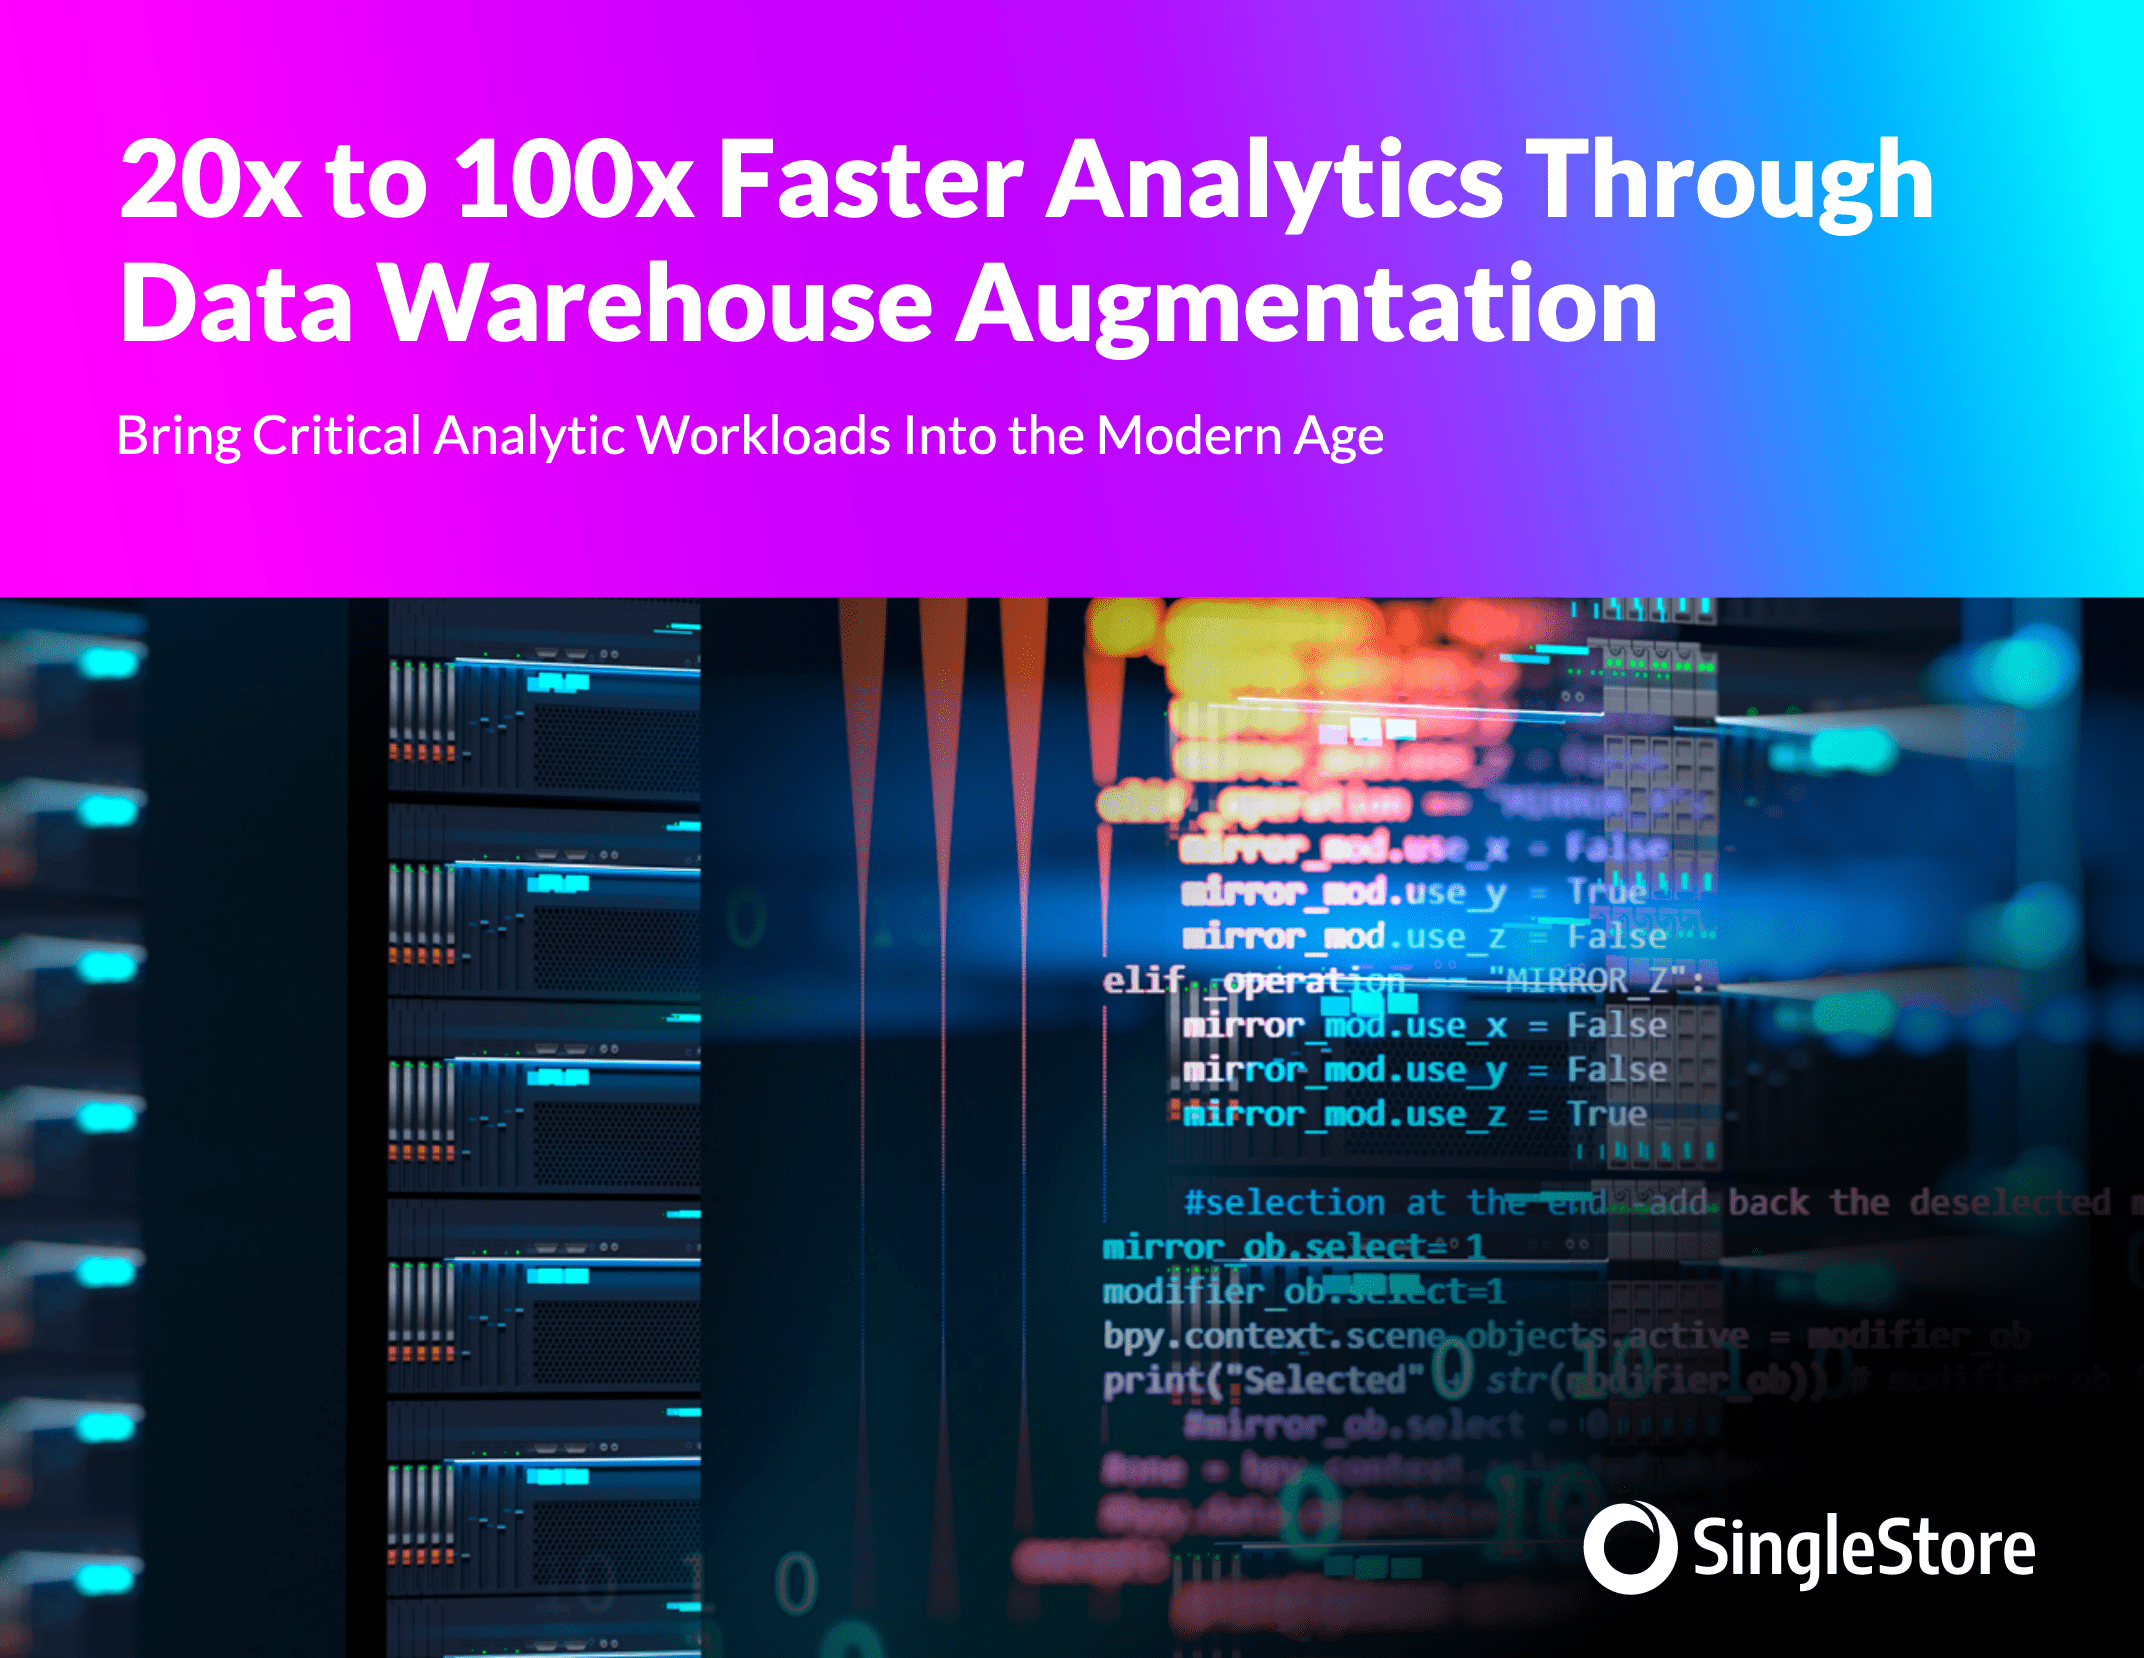 Data Warehouse Augmentation cover - 20x to 100x Faster Analytics Through Data Warehouse Augmentation